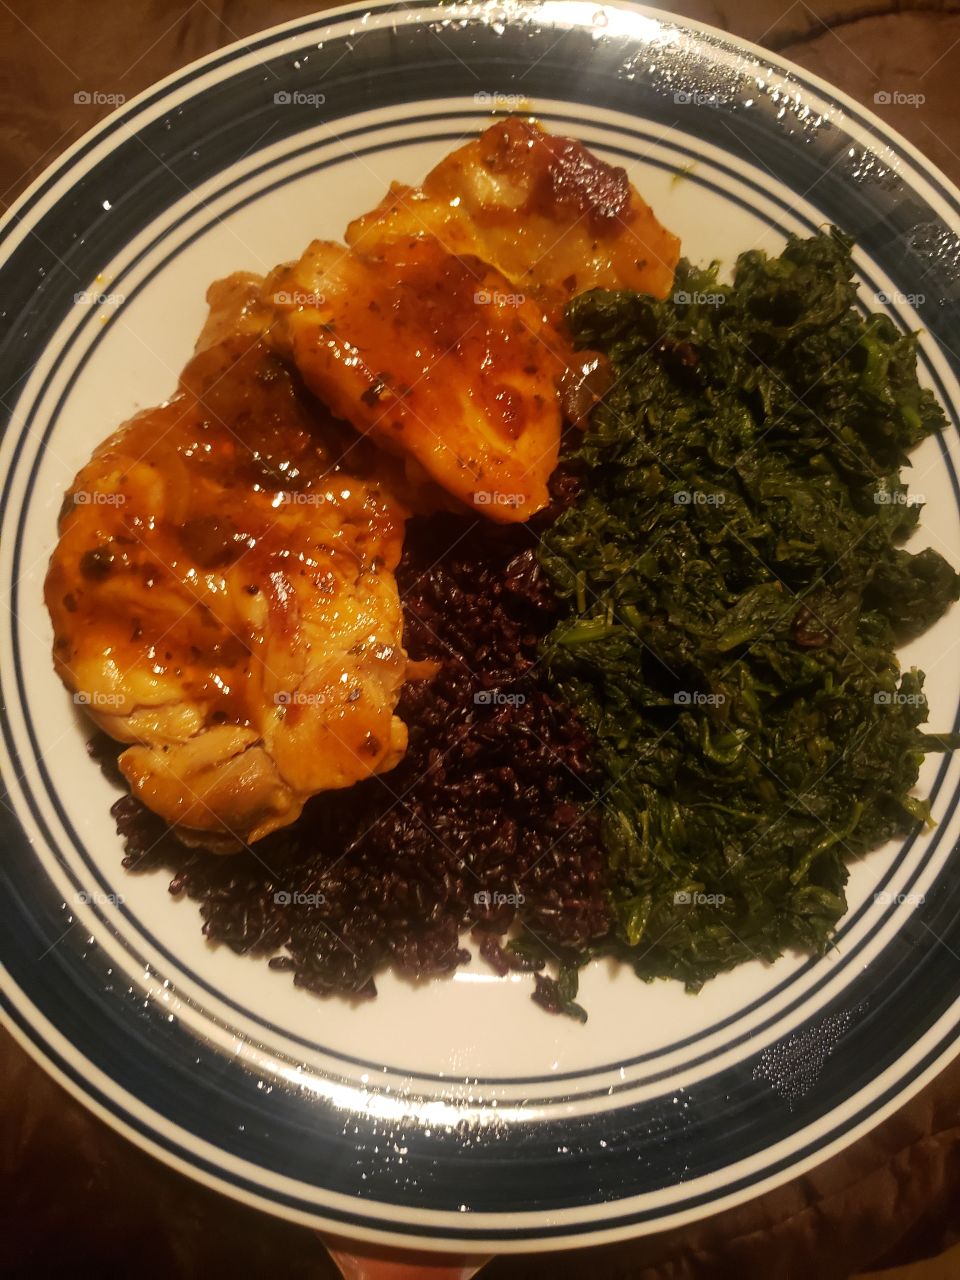 baked chicken, barbecue sauce, collard greens, black rice, food, good, delicious